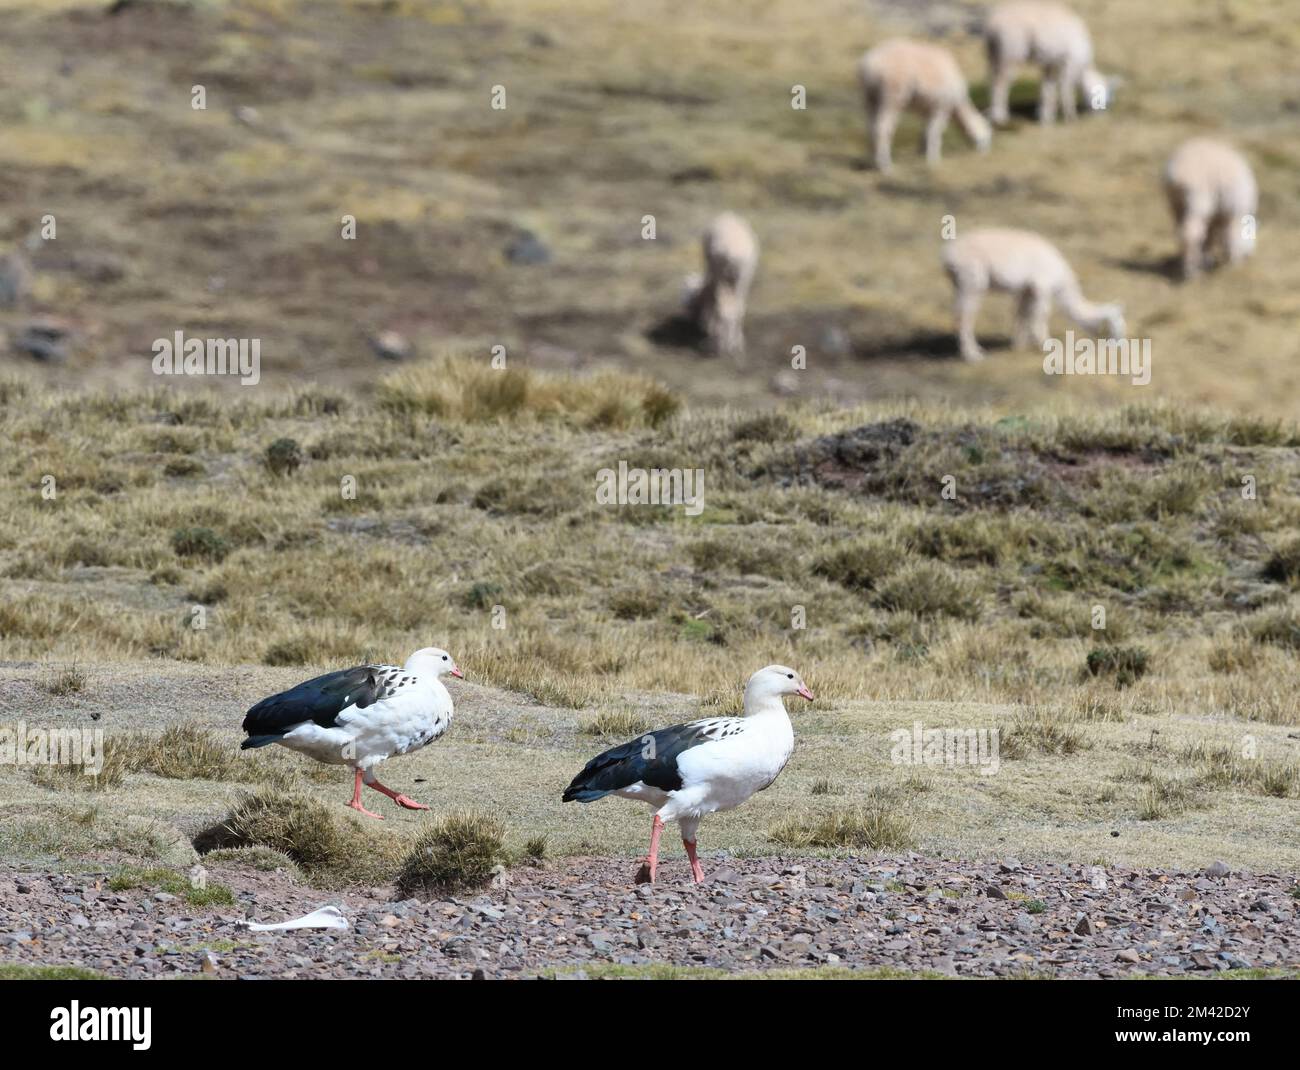 Andean geese (Chloephaga melanoptera) walk past grazing alpacas at about 5,000m in the mountains above San Mateo. San Mateo, Lima, Peru. Stock Photo